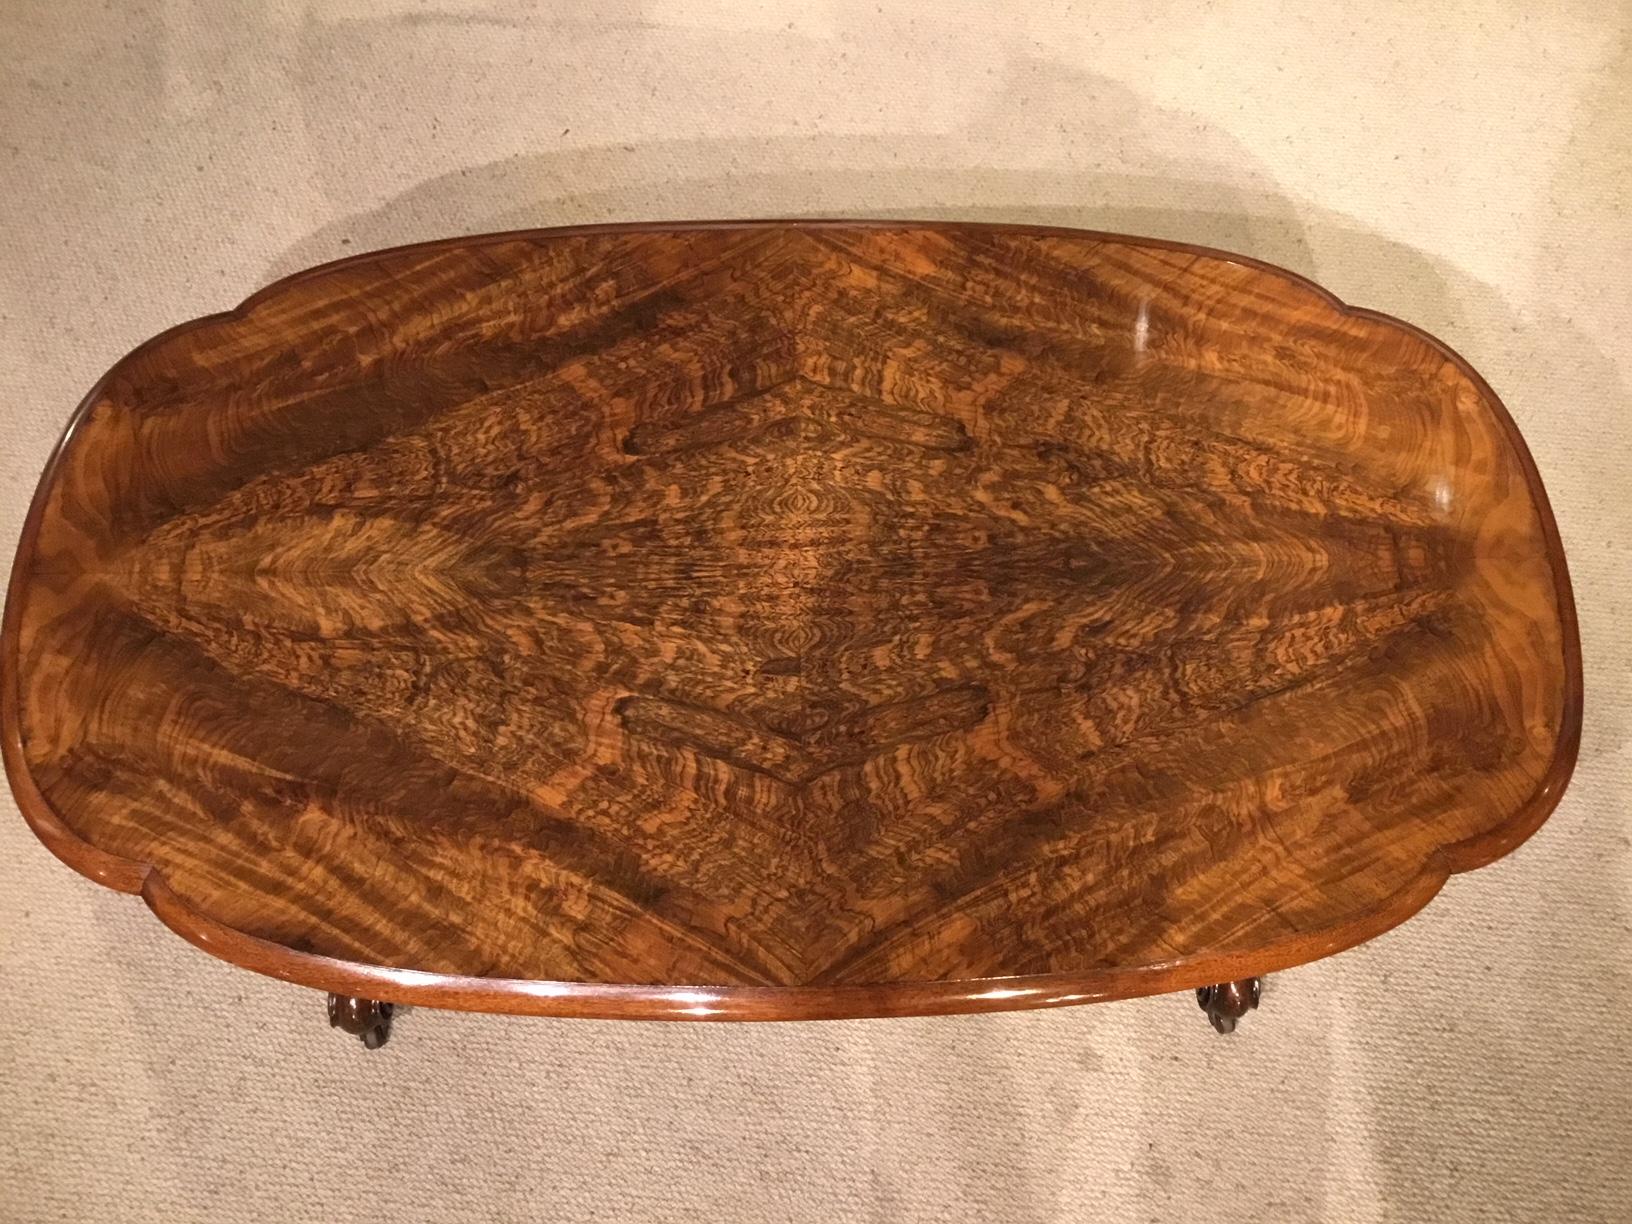 A beautiful burr walnut Victorian Period antique coffee table. Having an oval top veneered in beautifully figured burr walnut with walnut moulding and frieze. Supported on four turned and fluted columns with finely carved floral detail and a central